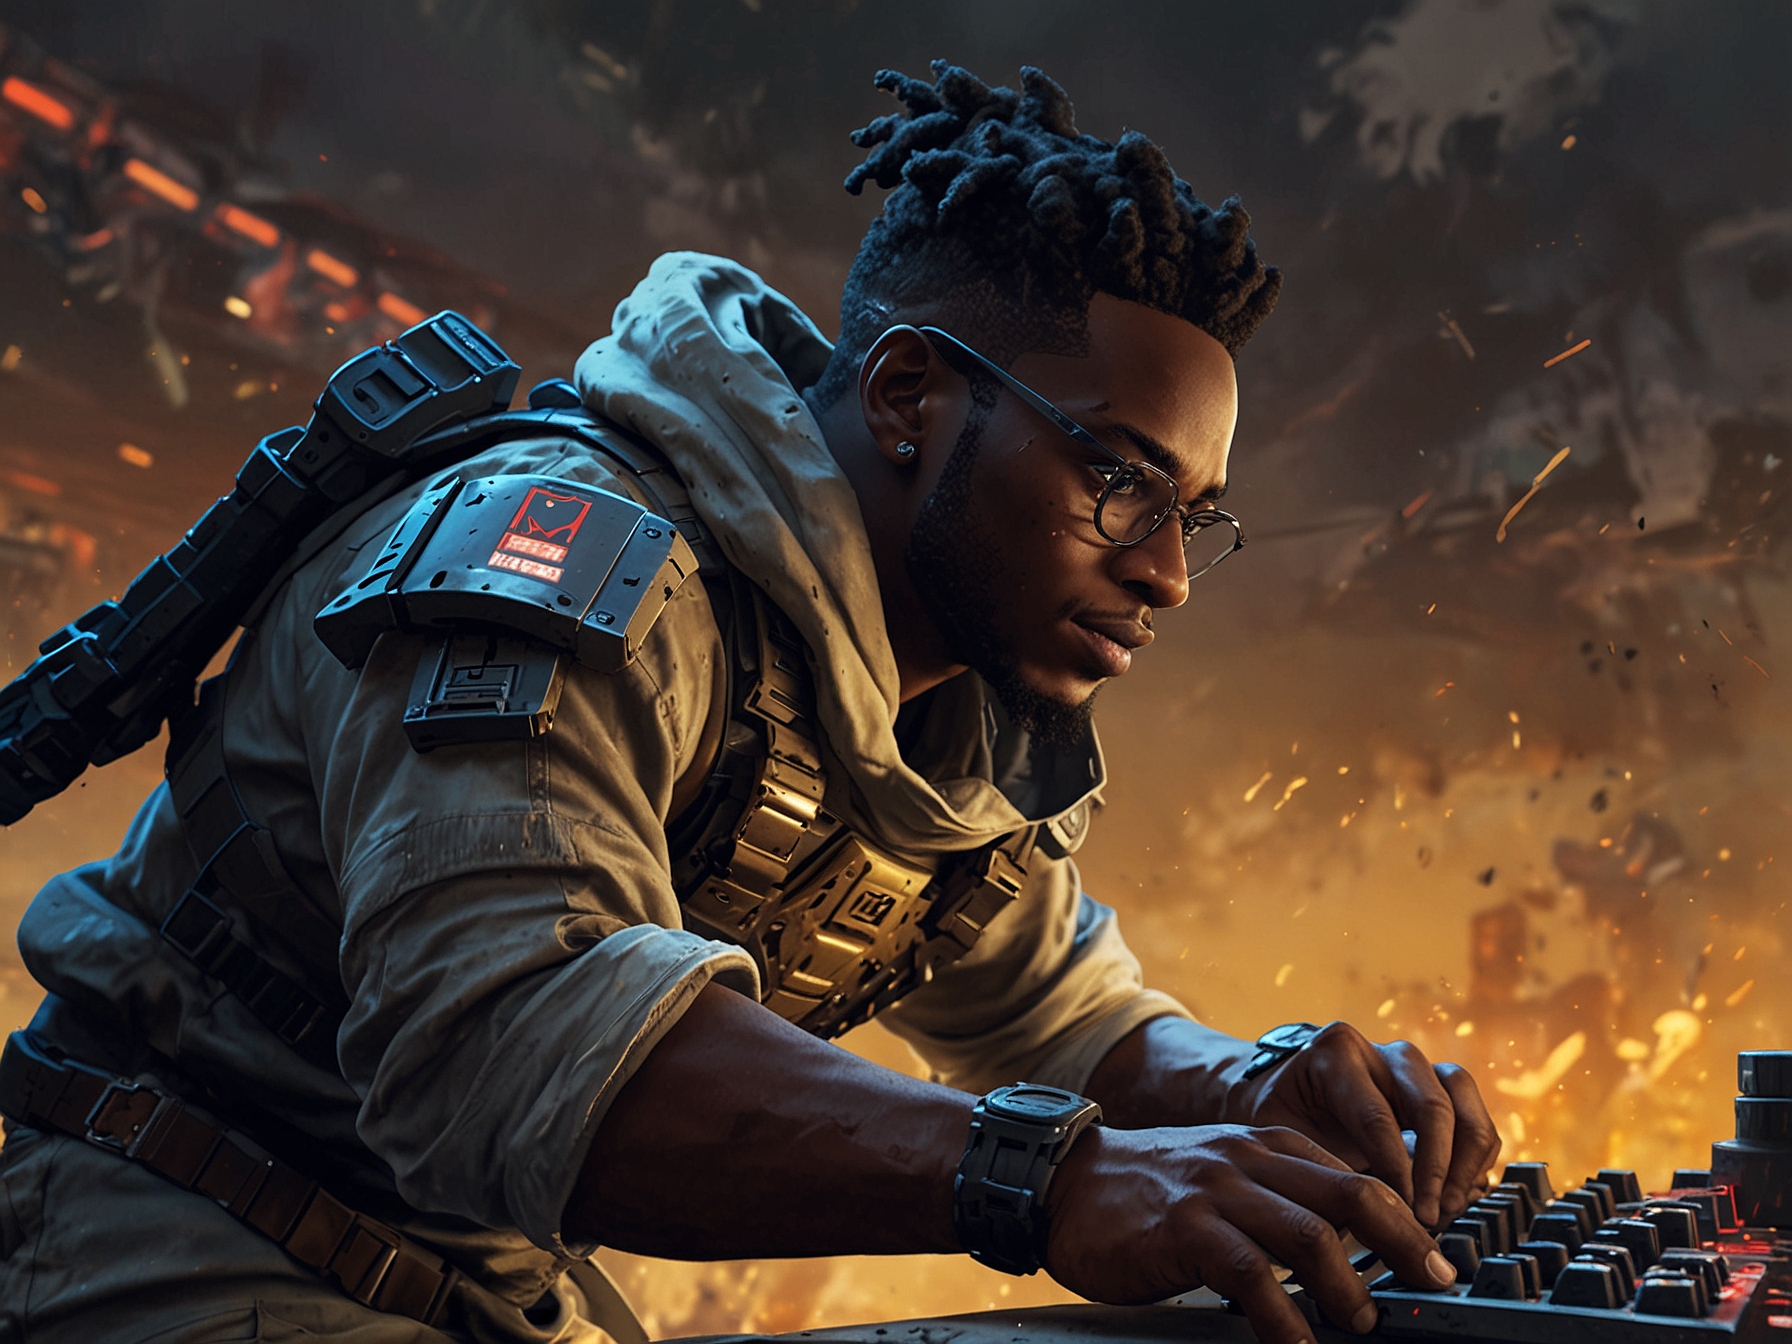 GreyEminence, a Nigerian pro gamer, in action playing Apex Legends, showcasing precision and strategic movements in gameplay, highlighting the importance of mastering character abilities and communication.